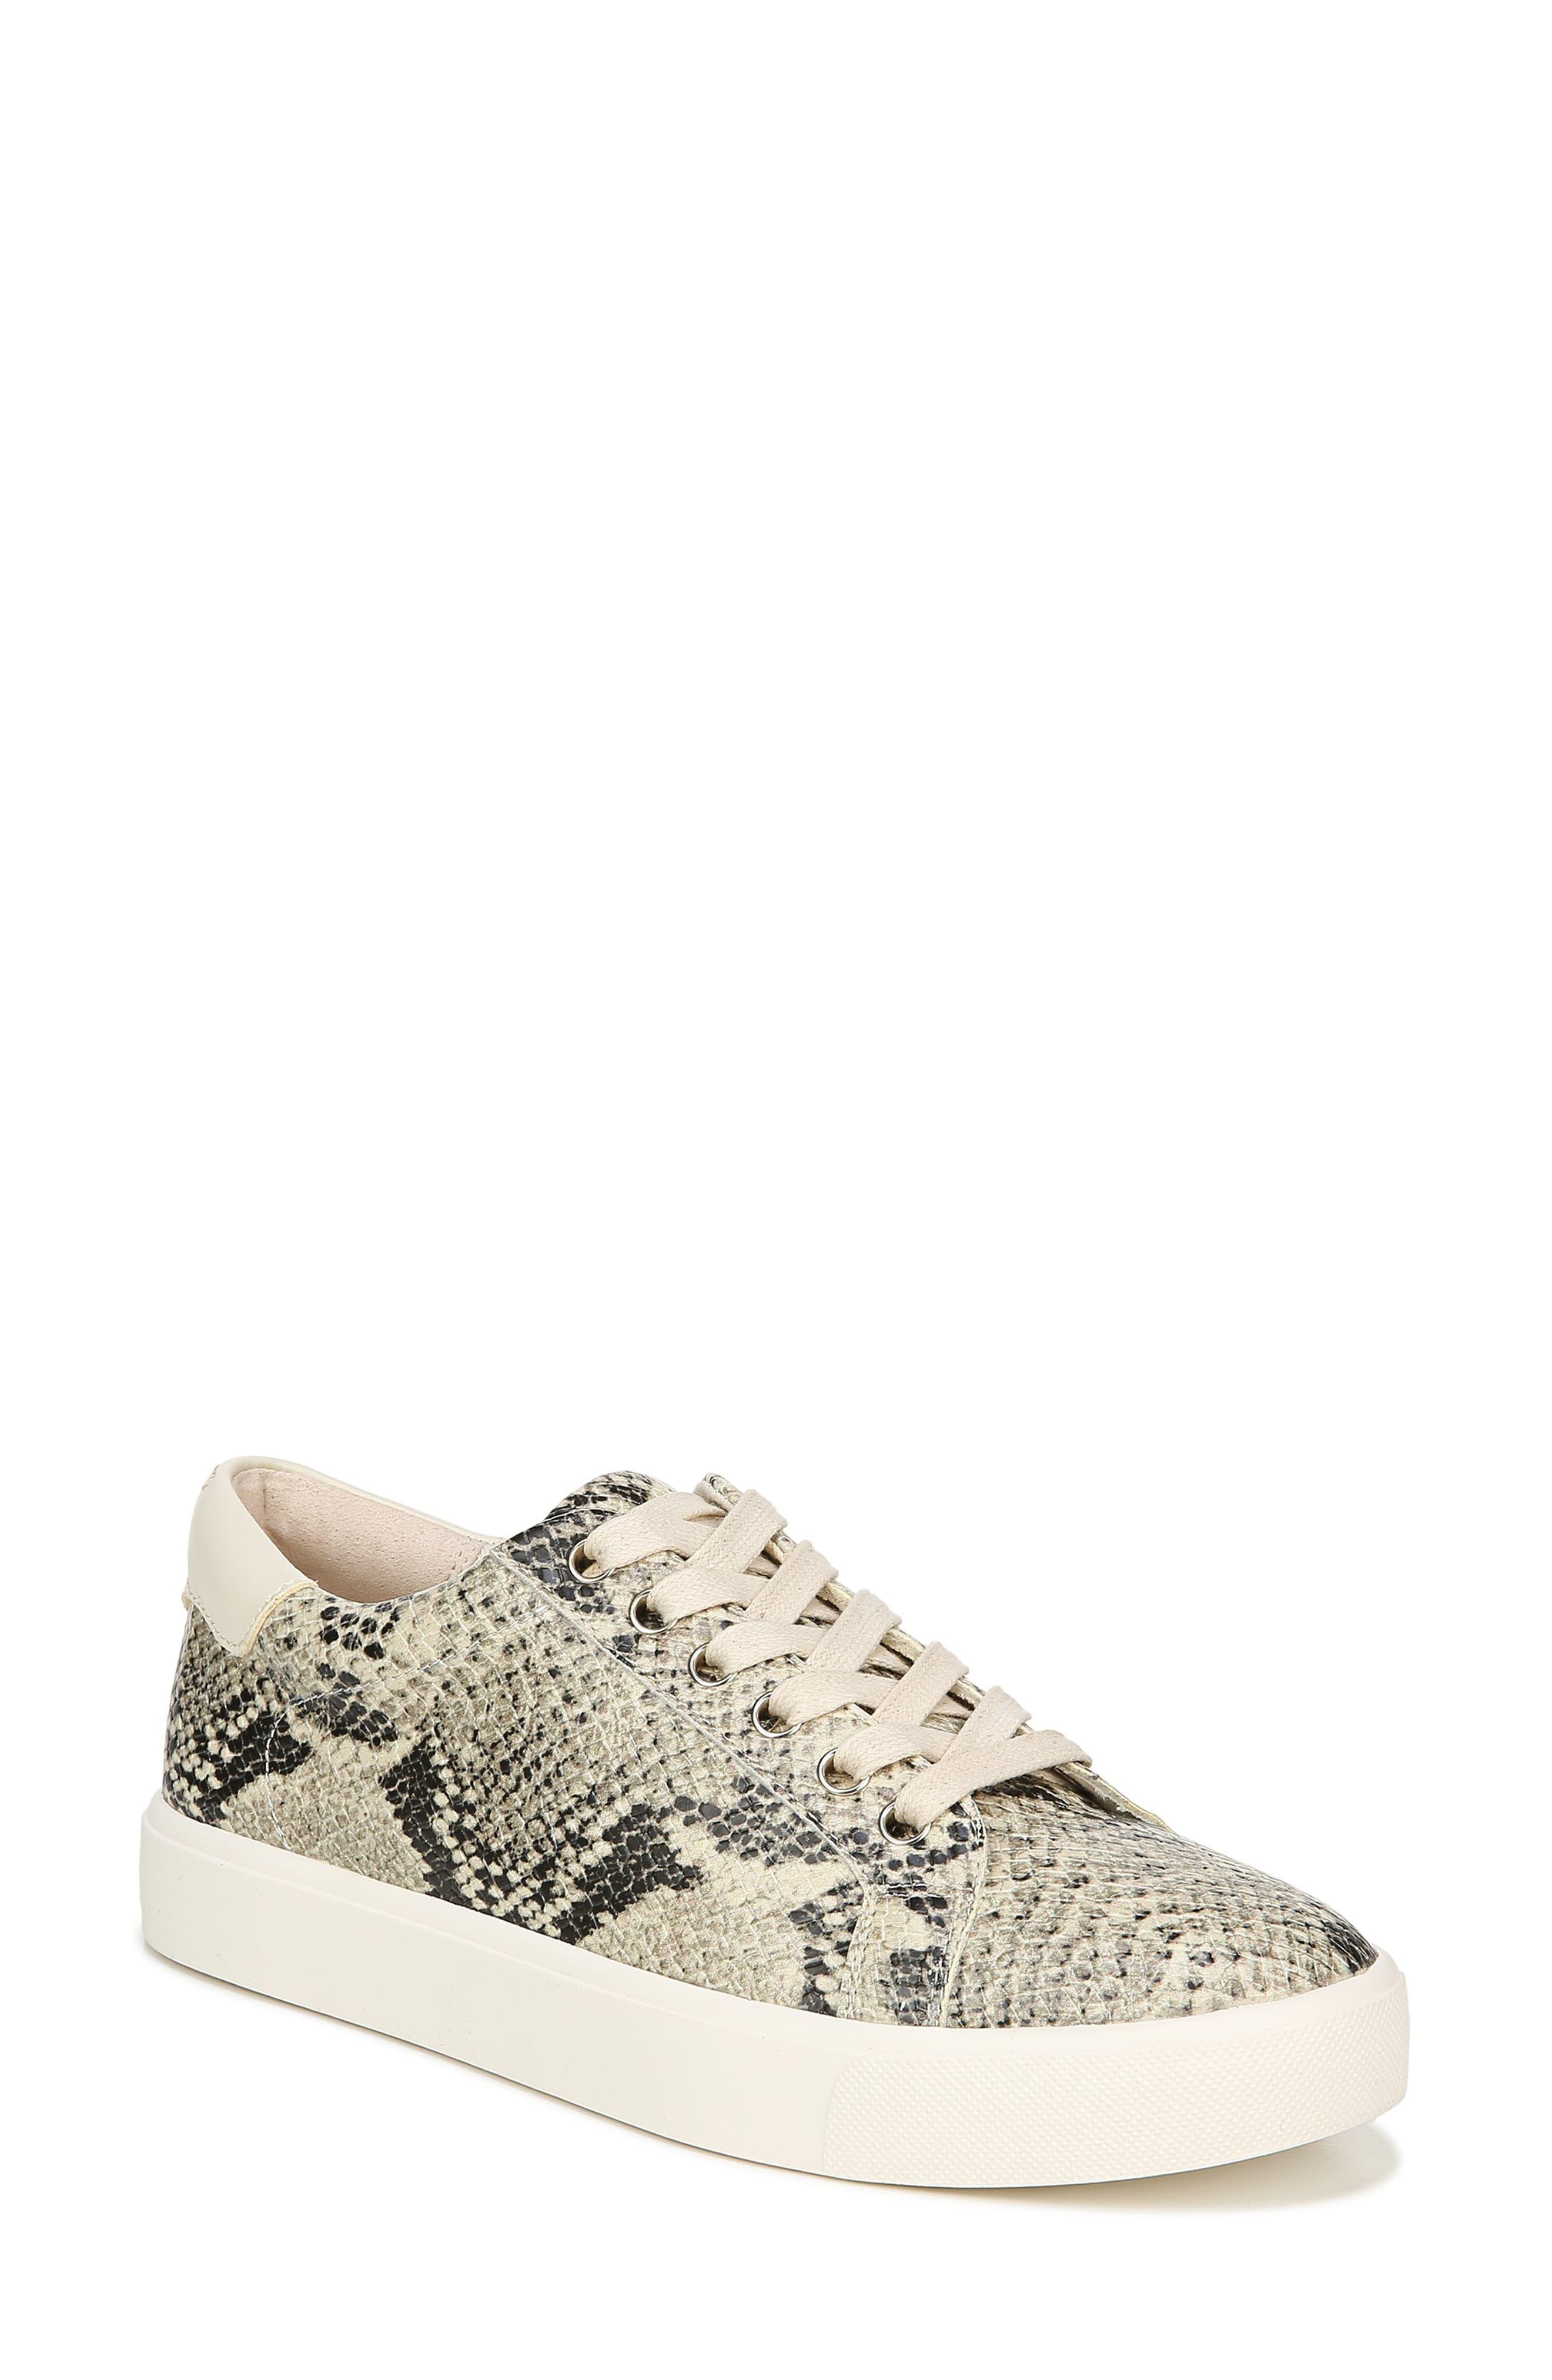 Sam Edelman Synthetic Ethyl Snake Print Lace-up Sneakers - Save 17% - Lyst